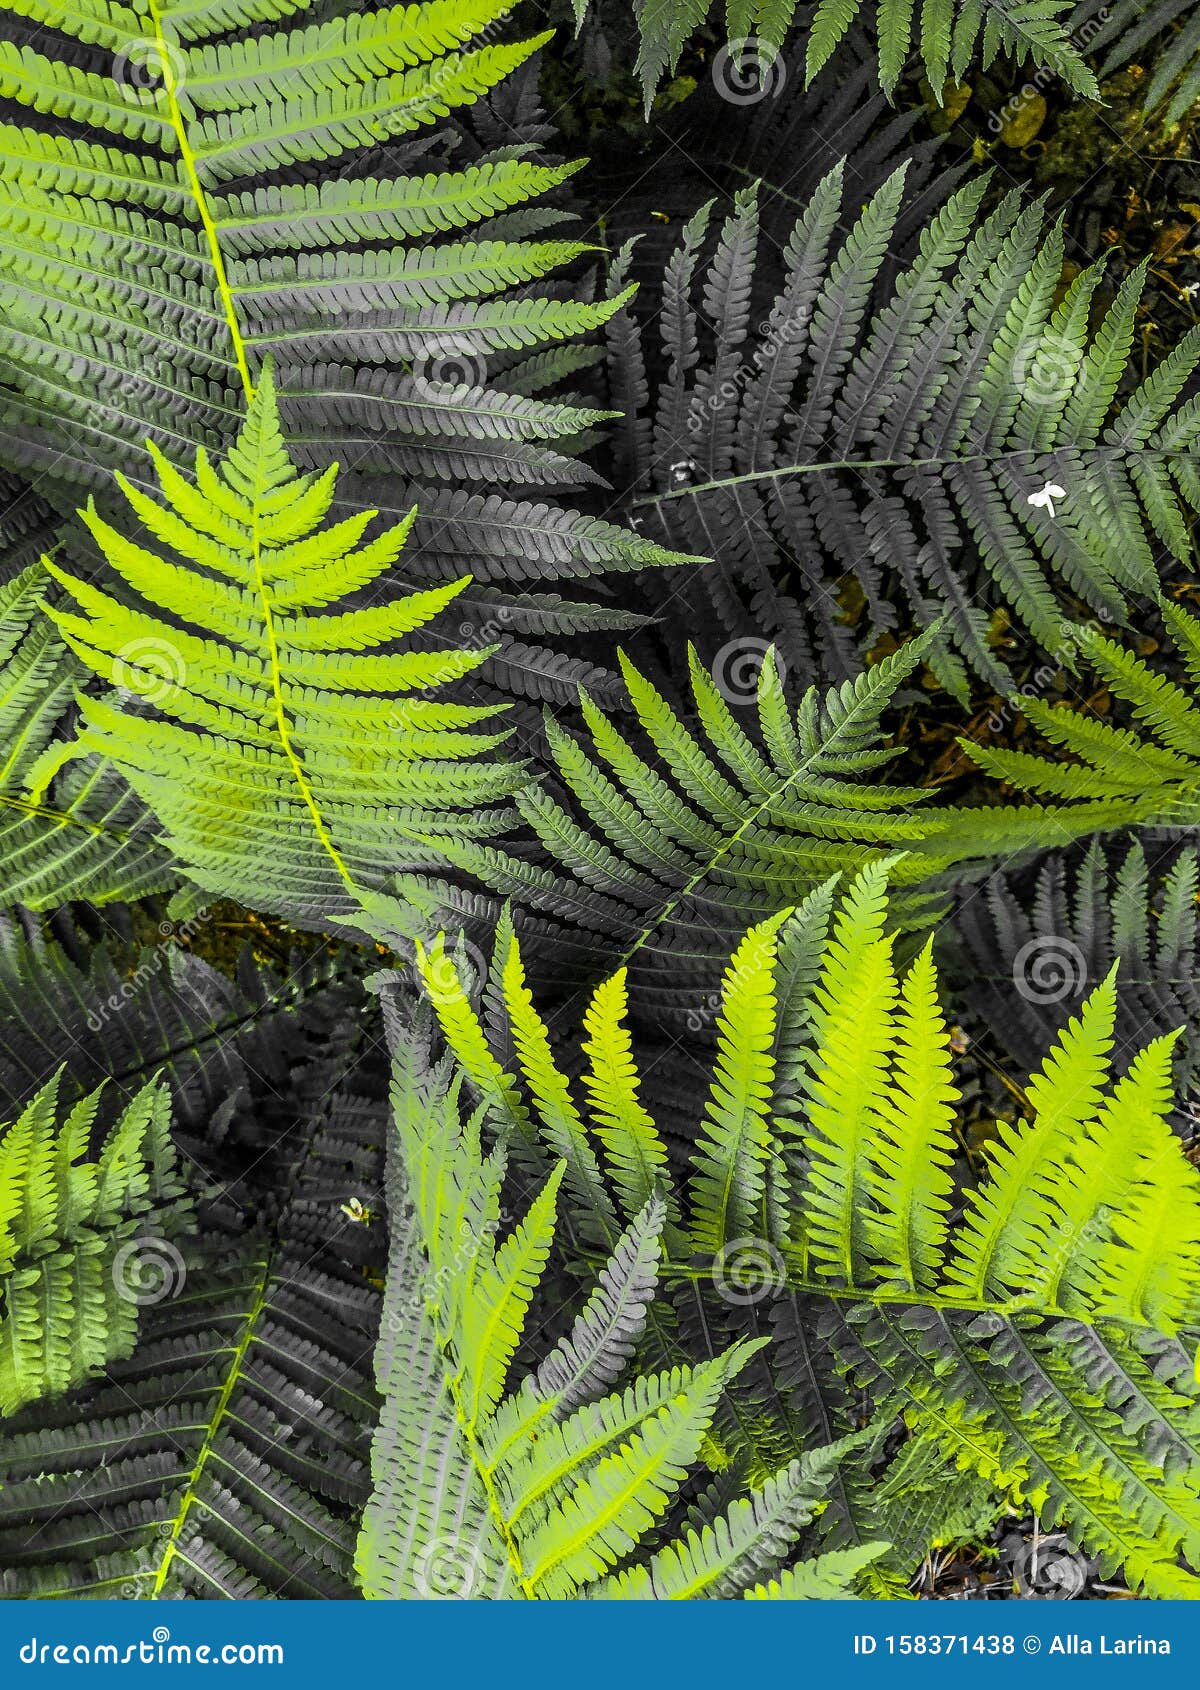 Abstract Green Grey Fern Leaves Background Close Up Stock Photo - Image